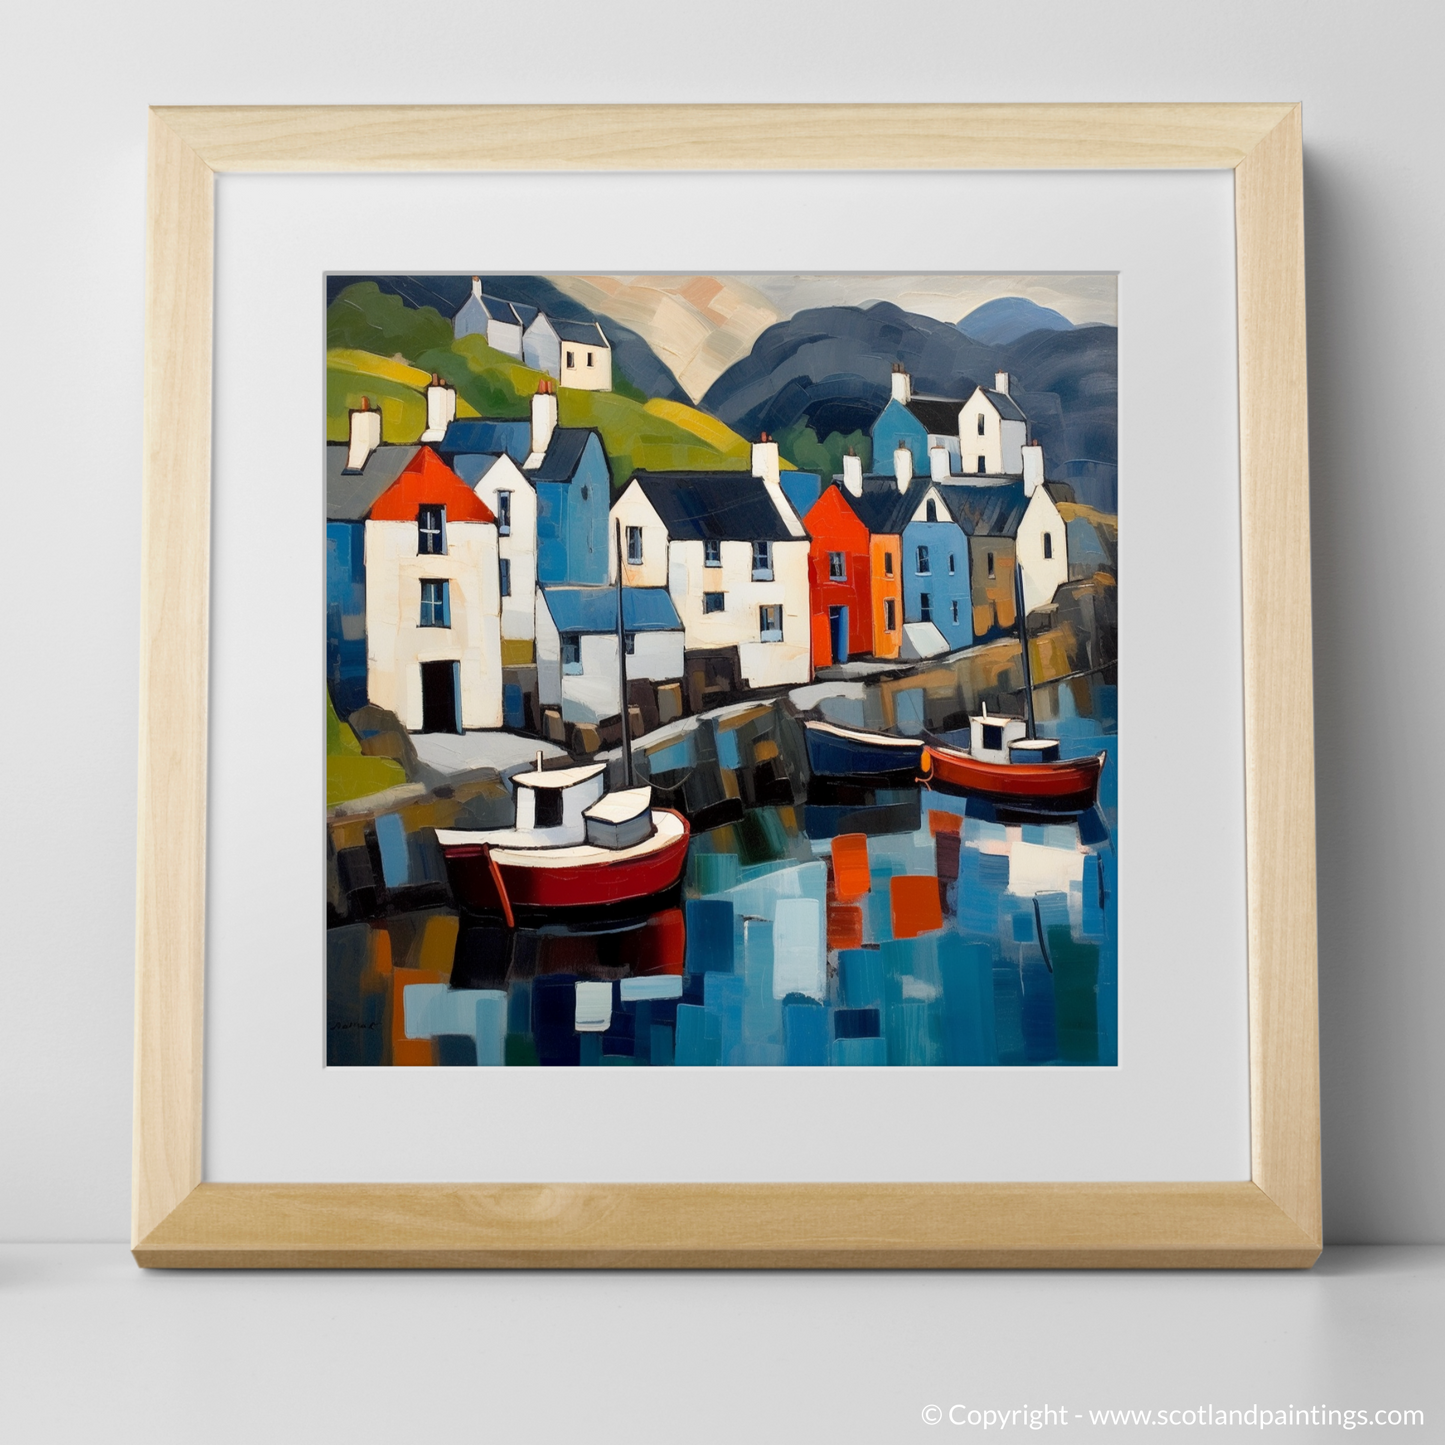 Cubist Portree: A Modernist Take on the Isle of Skye Harbour